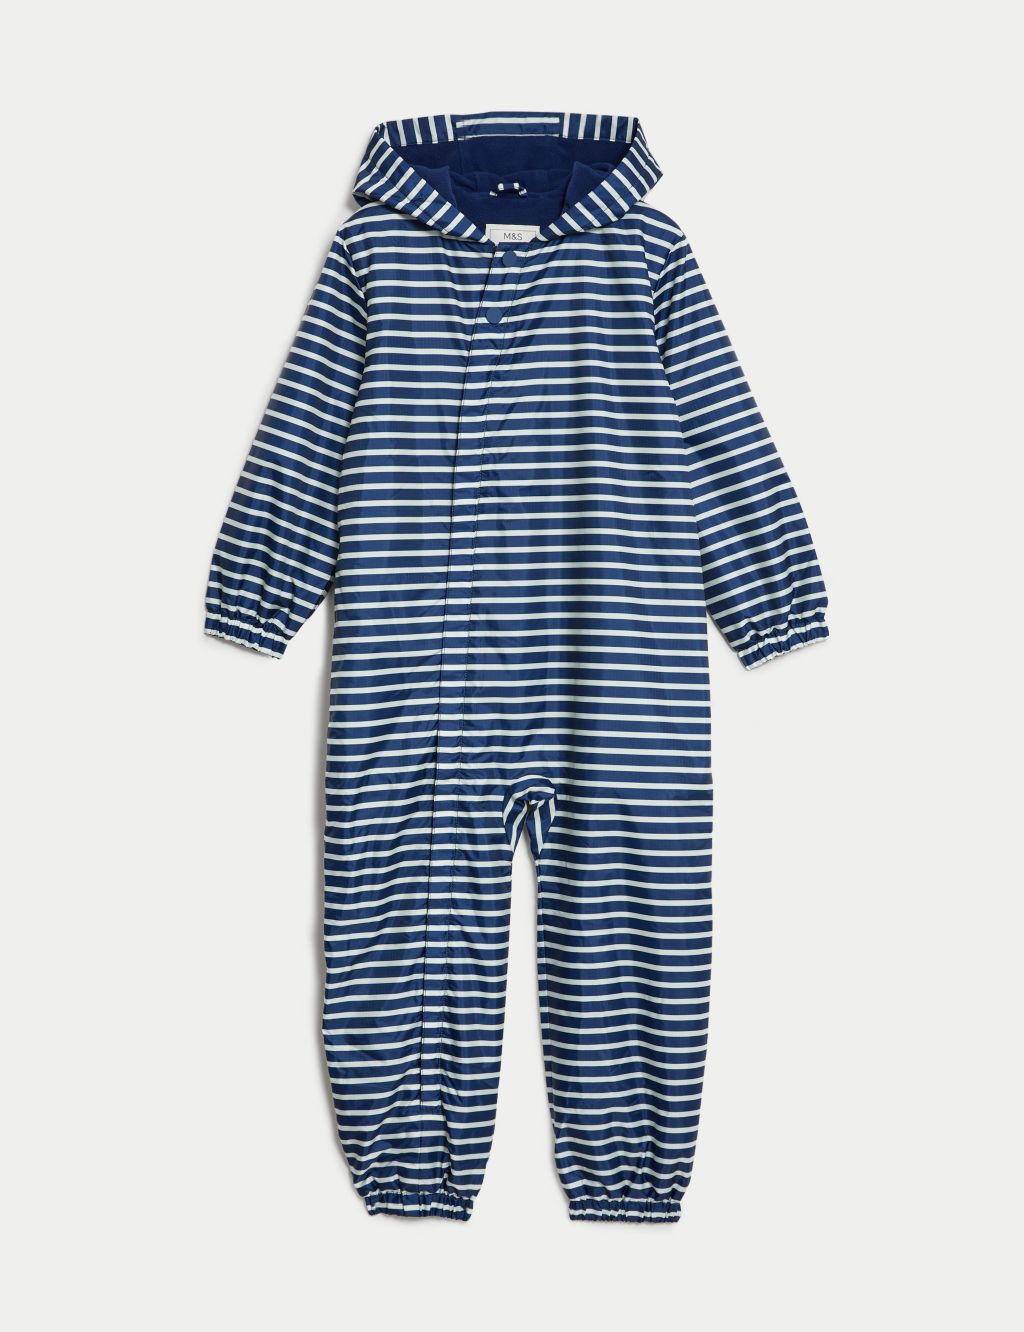 Hooded Striped Puddlesuit (3-5 Yrs) image 1